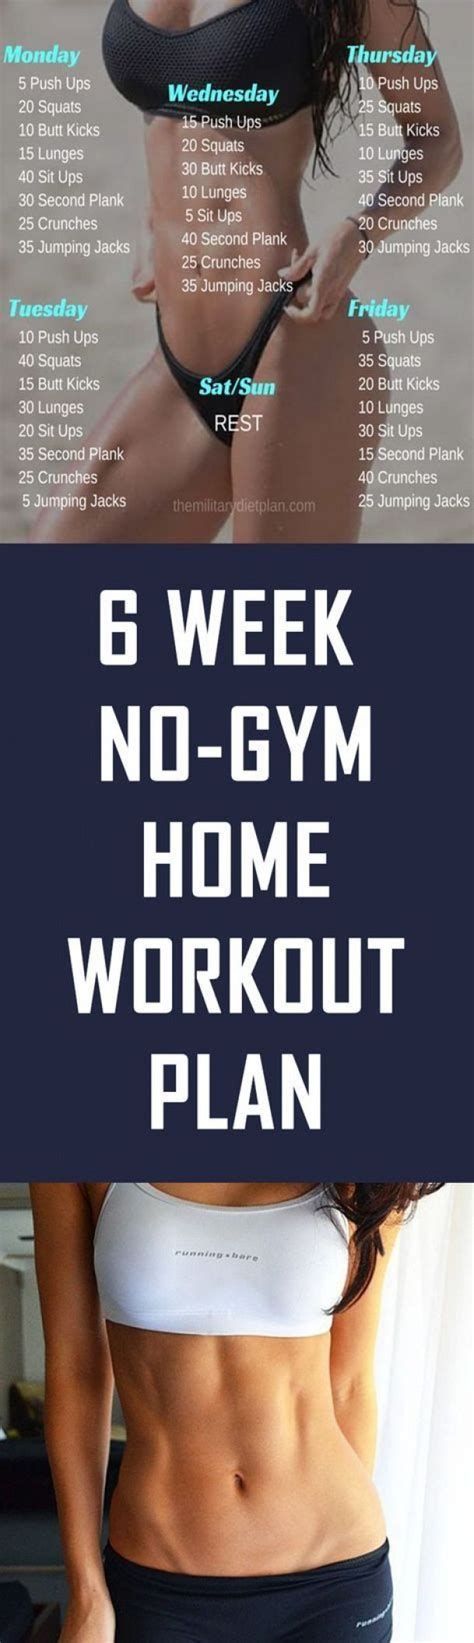 Week No Gym Home Workout Plan Burnfat At Home Workout Plan Workout Plan At Home Workouts